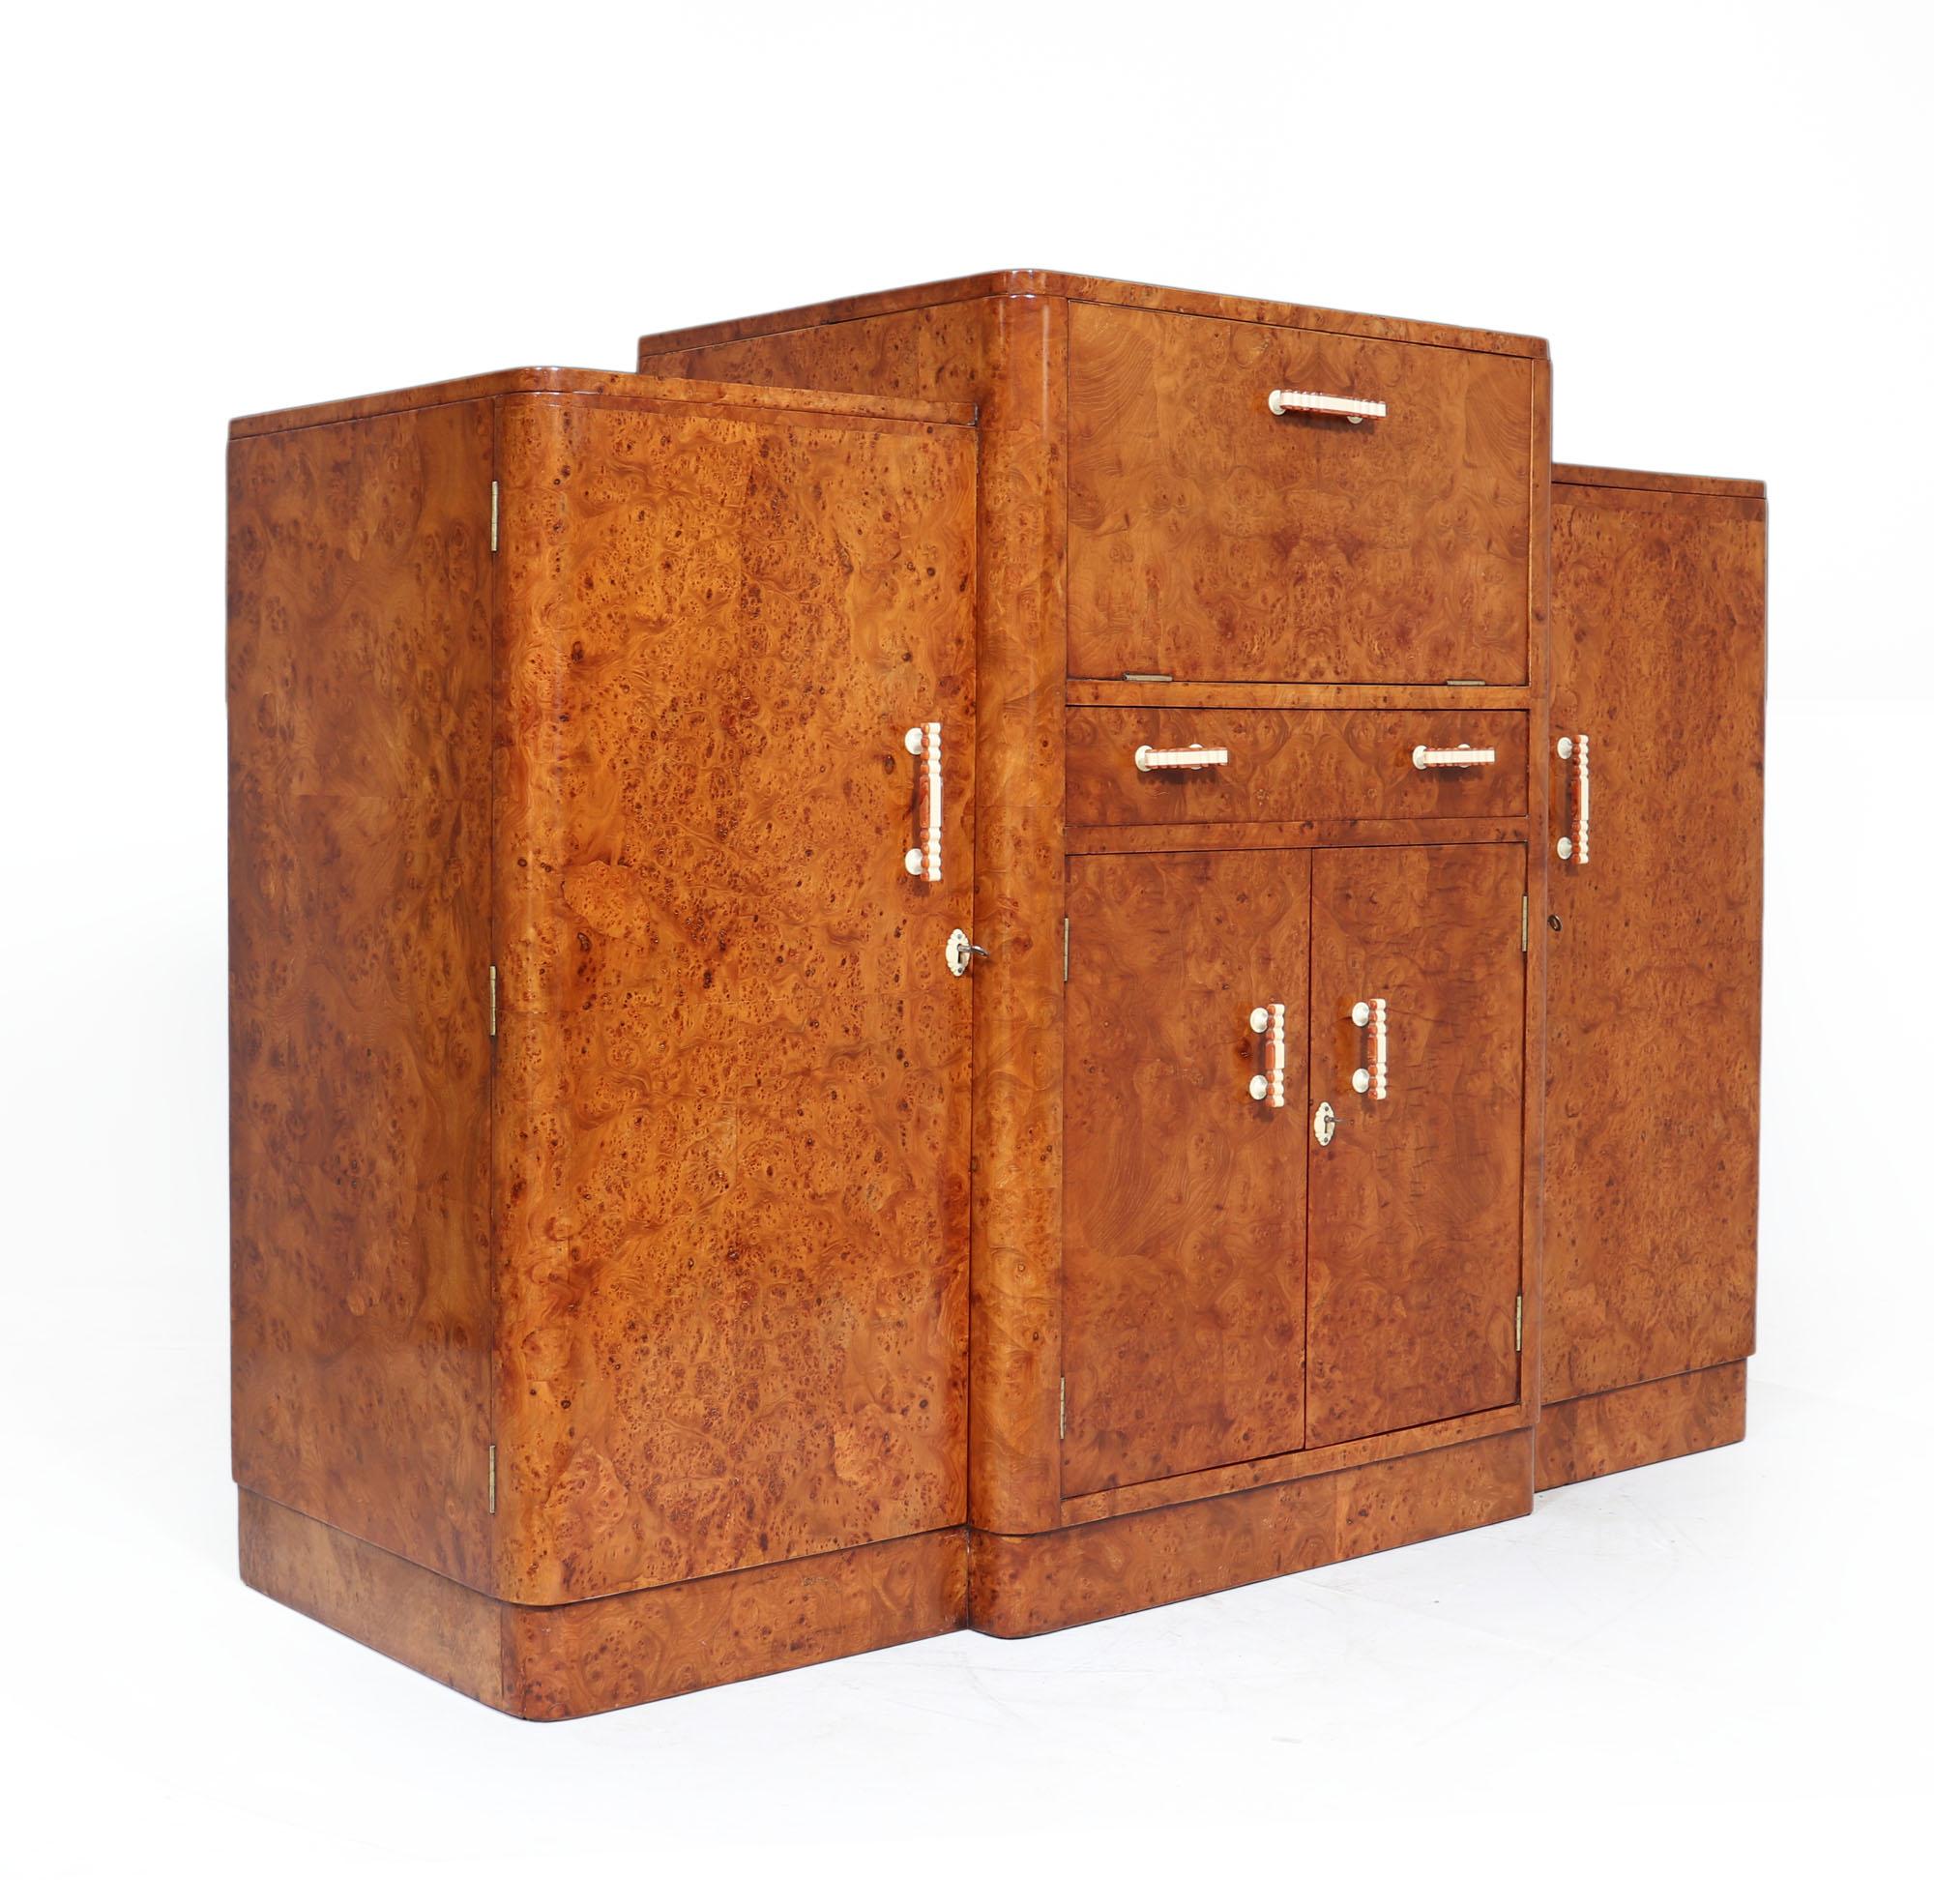 Art Deco cocktail sideboard
A lovely English Art Deco sideboard with central pop out cocktail, the sideboard has four doors, the outer two having adjustable shelves and central cupboard having drinks bottle holders above this is is a baize lined